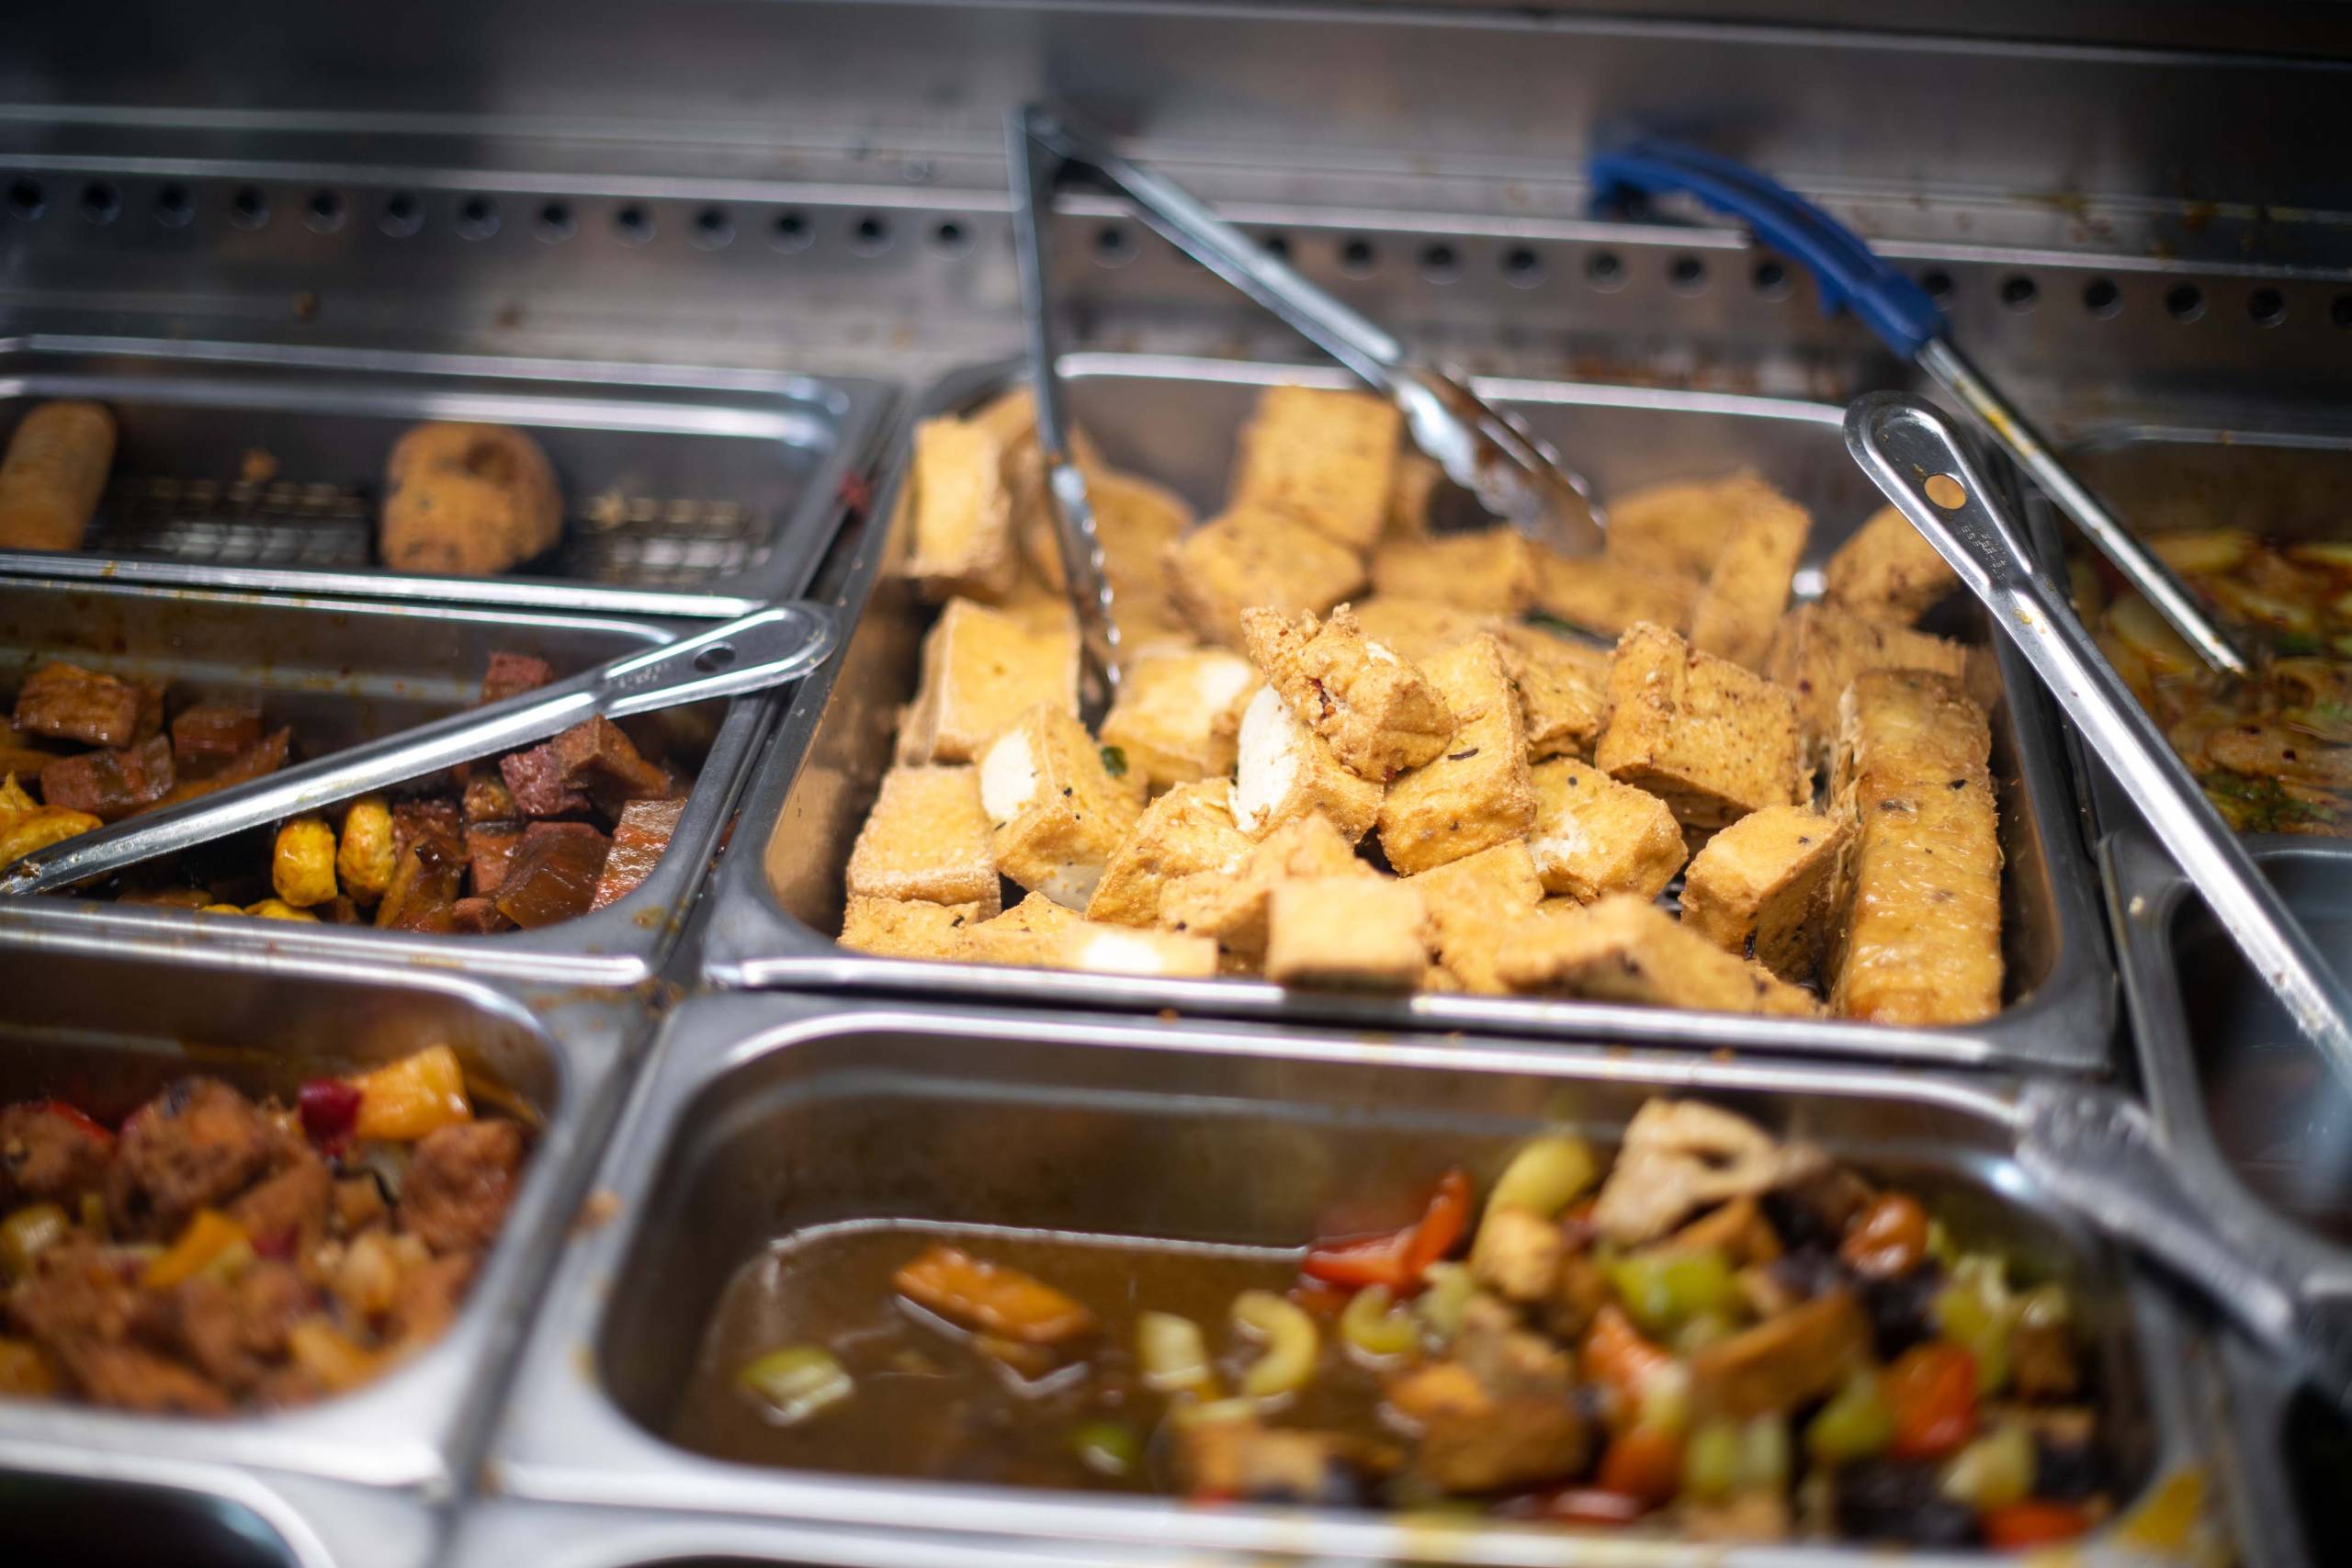 A steamer tray full of freshly fried tofu, as part of a buffet-style display.